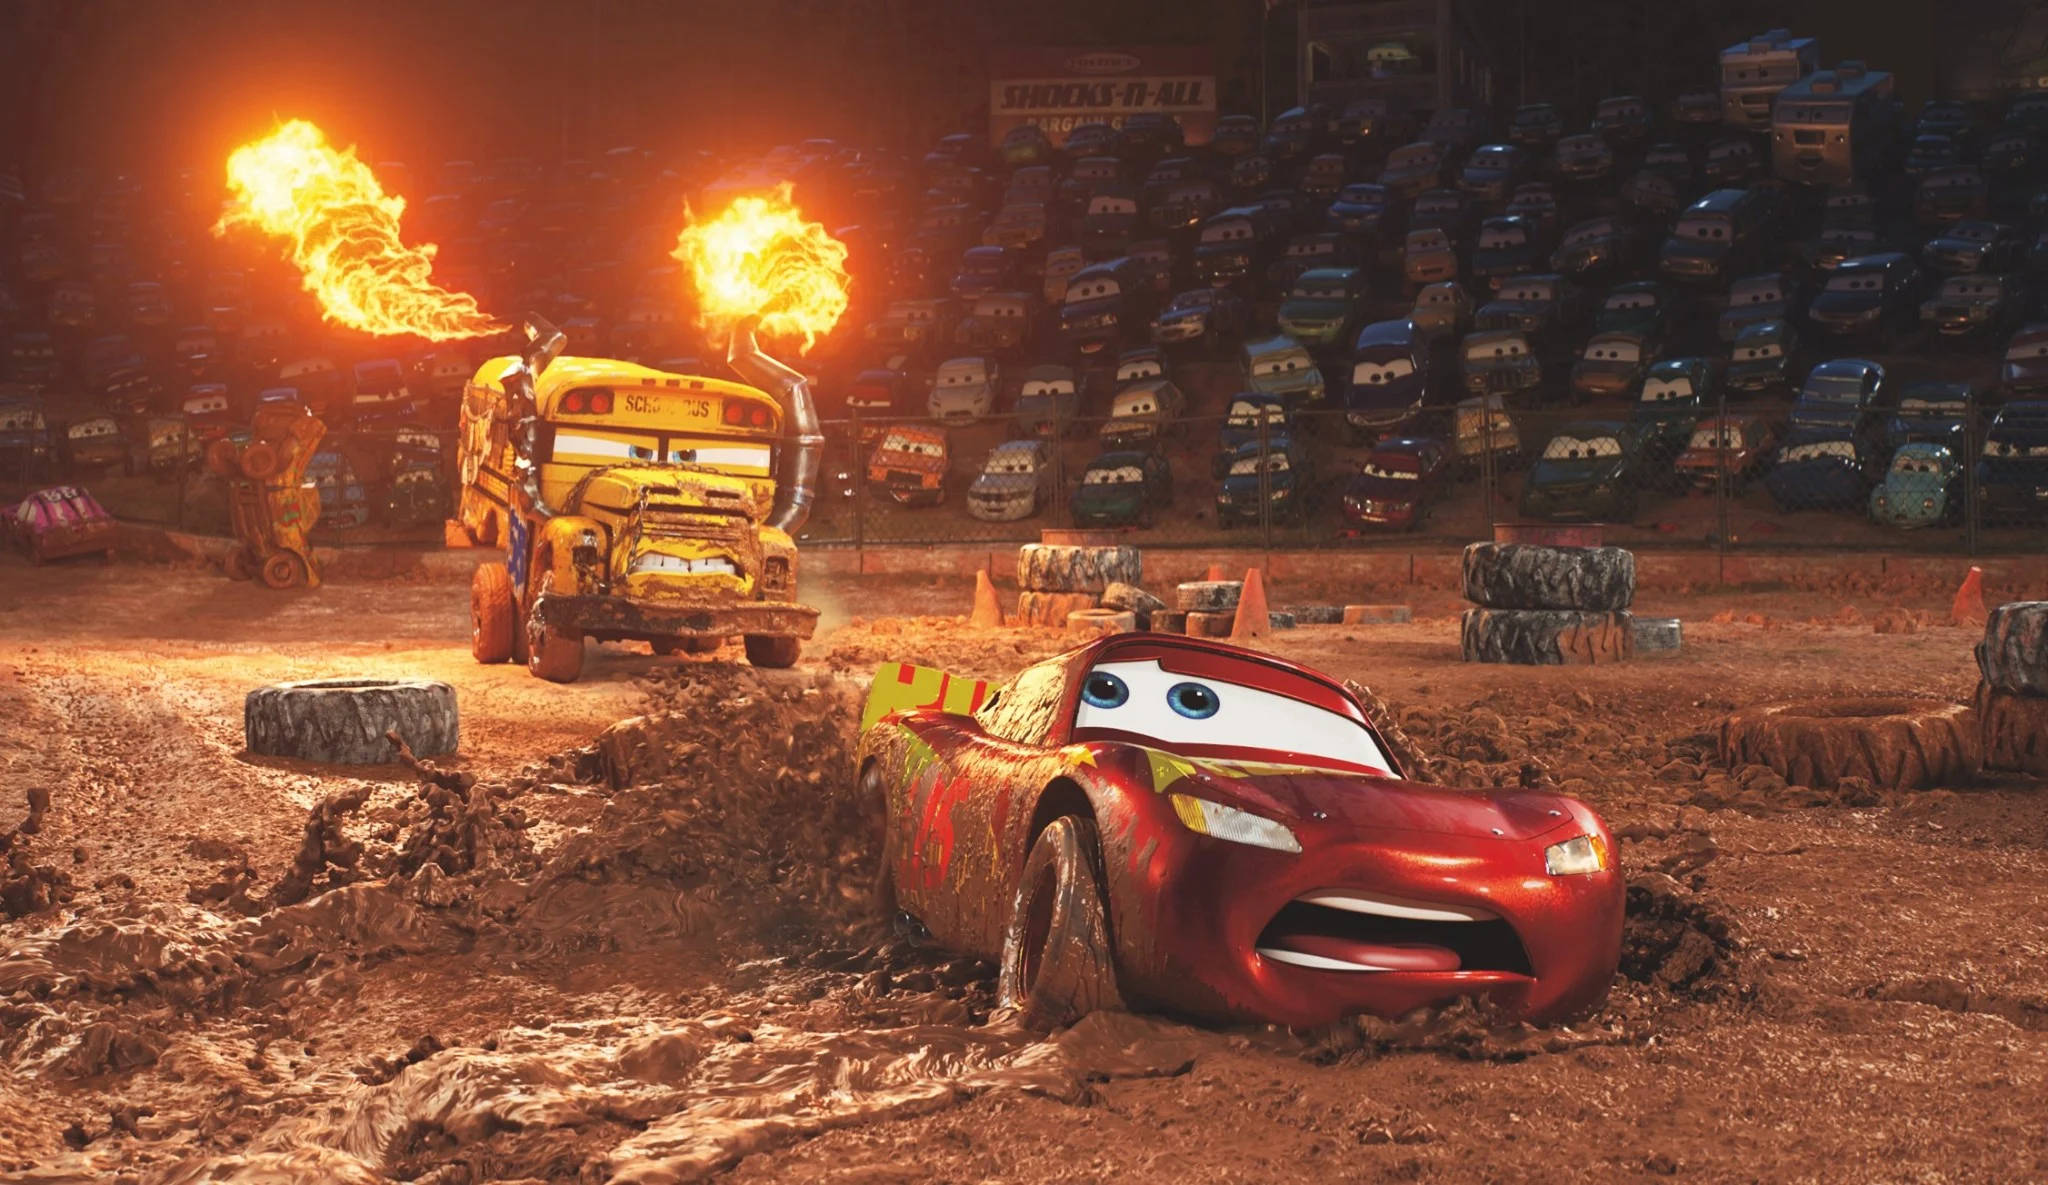 Action-Filled Racing Scene At Disney's Cars Mud Pit Wallpaper